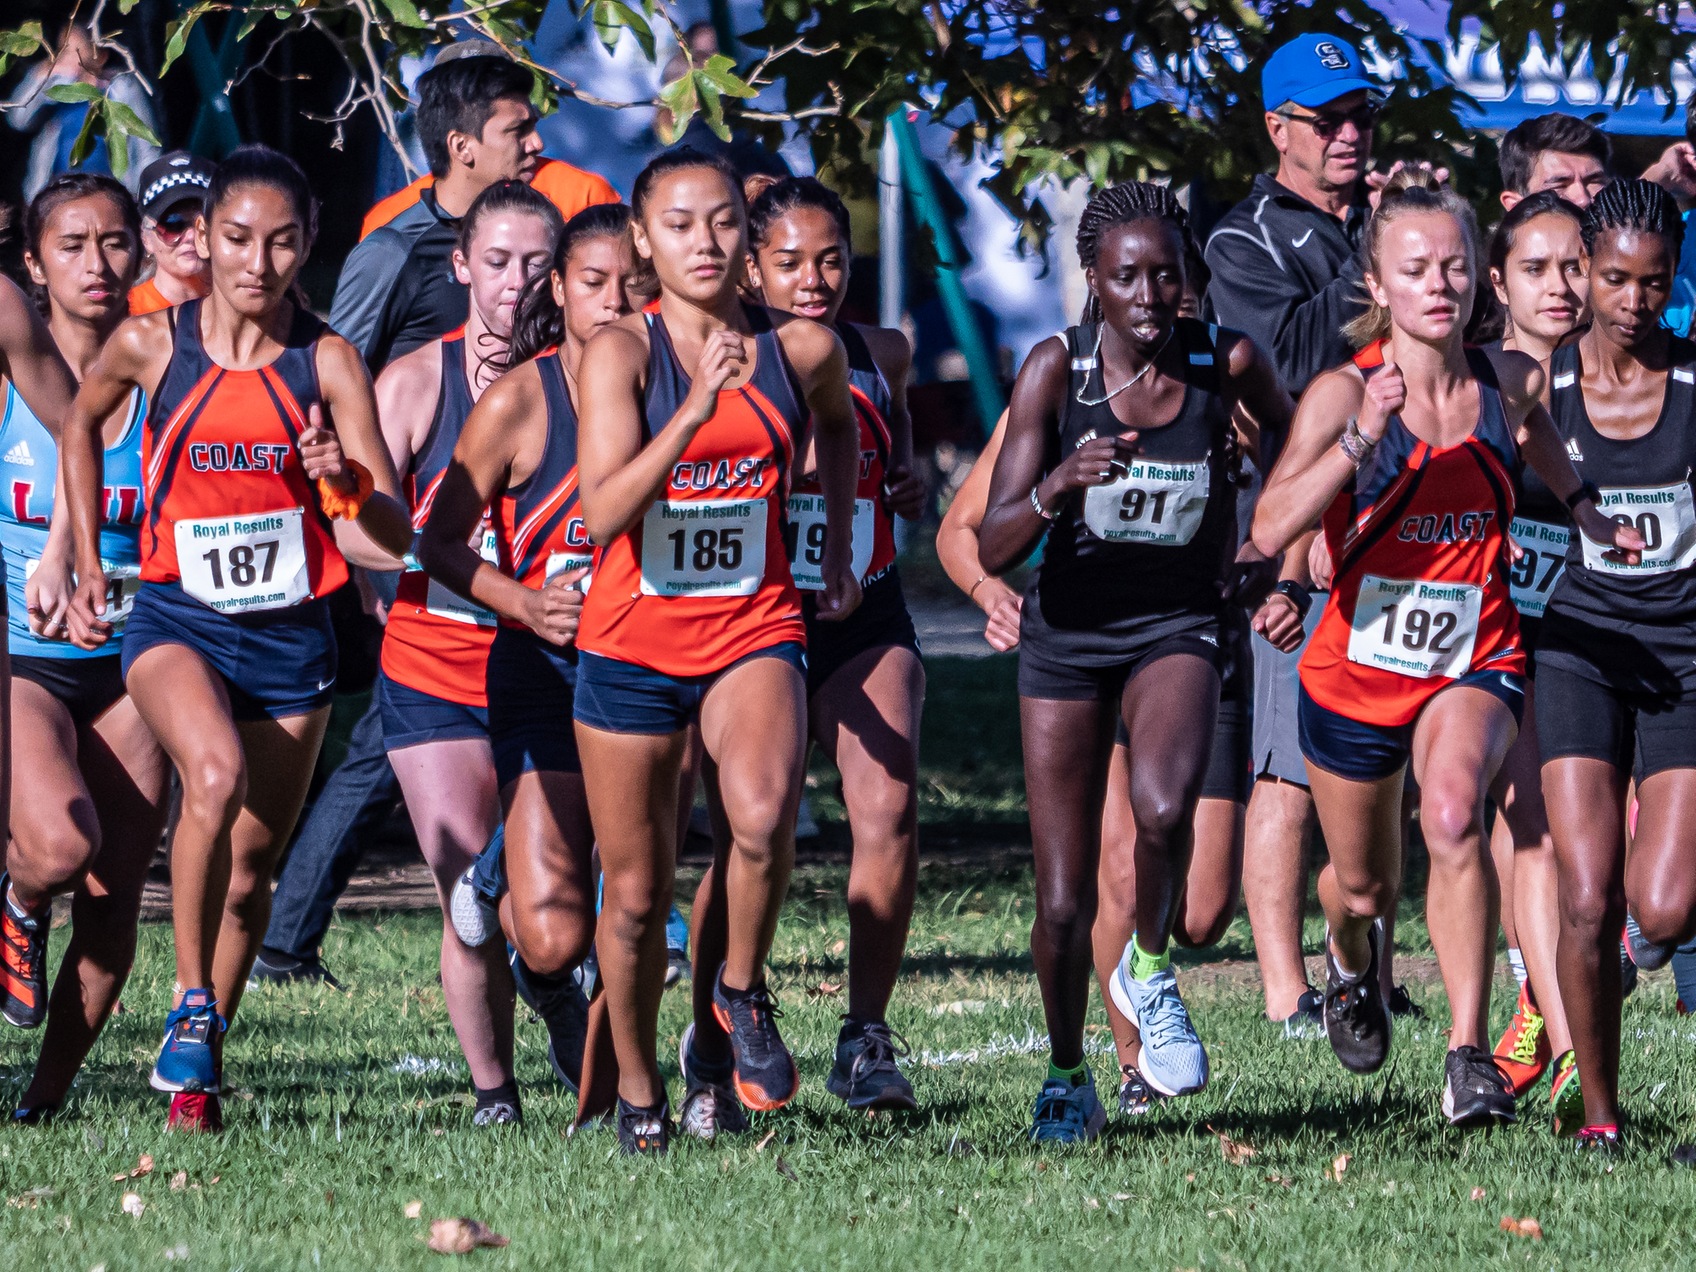 Olson sets the pace for Pirate women at Vanguard Invitational